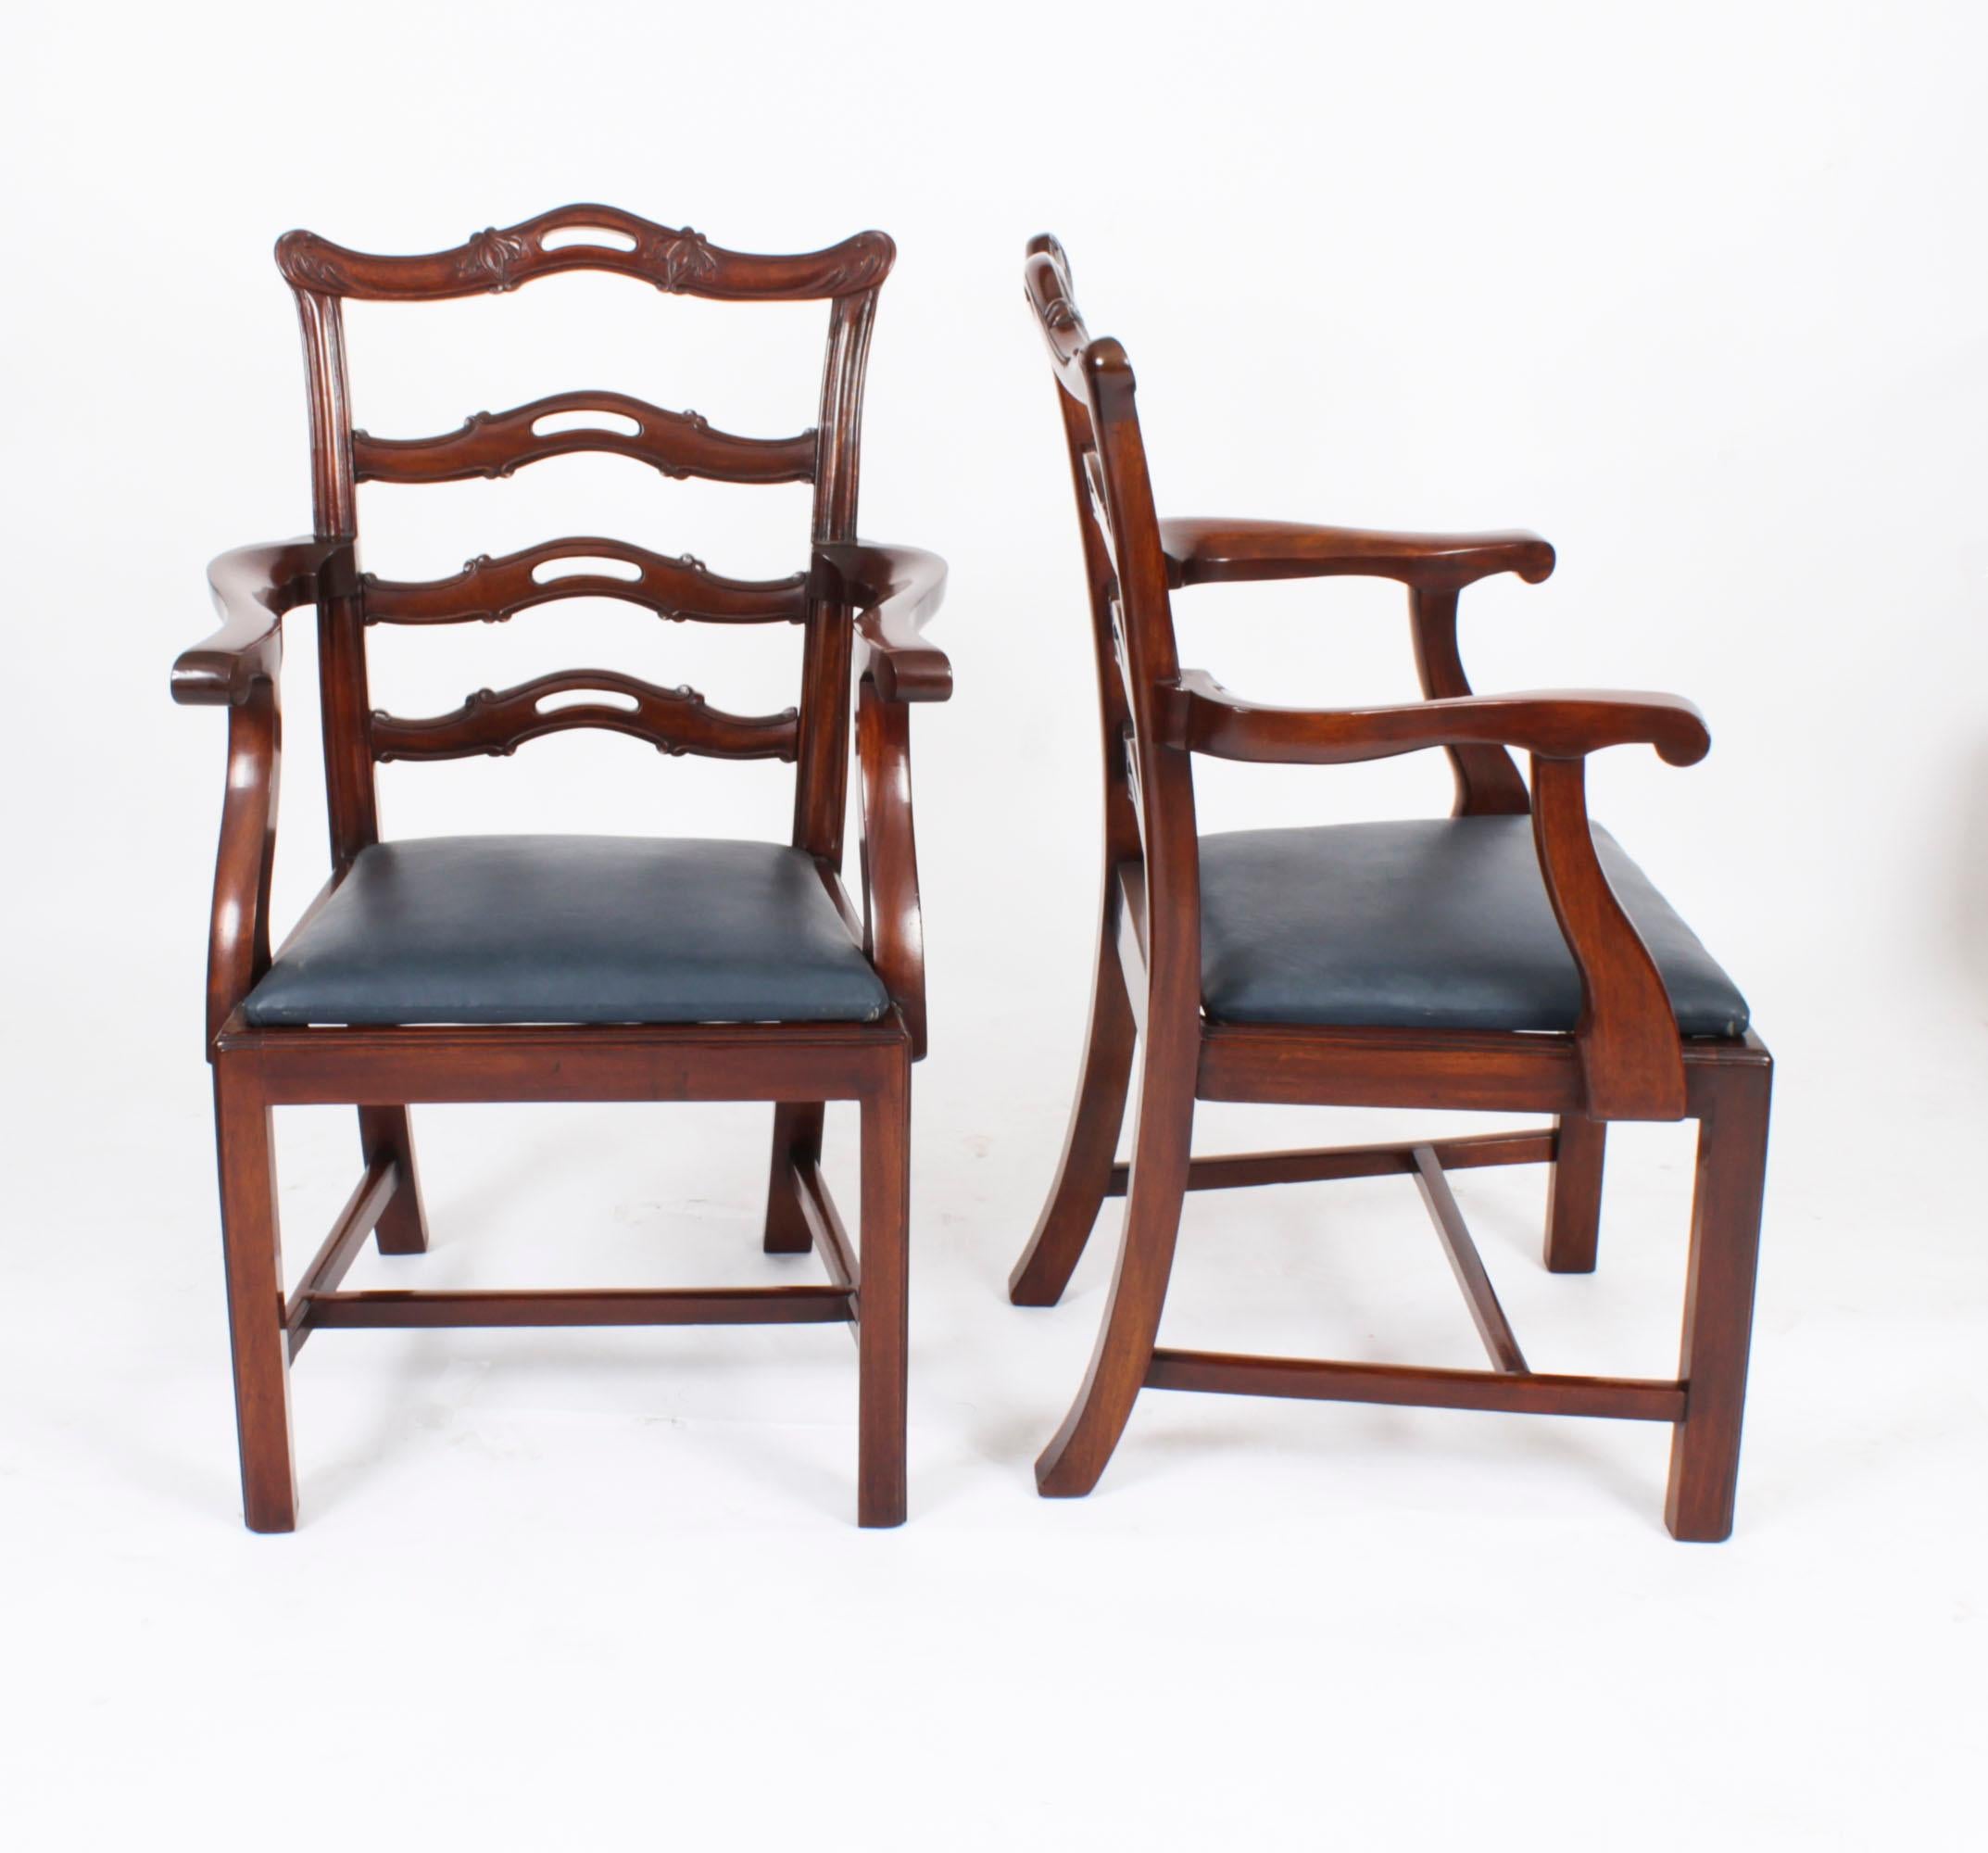 A beautiful Antique set of ten  Chippendale Revival Ladderback dining chairs, comprising eight sidechairs and two armchairs, dating from Circa 1880.

They have been crafted from hand carved solid flame mahogany with drop in seats upholstered in navy